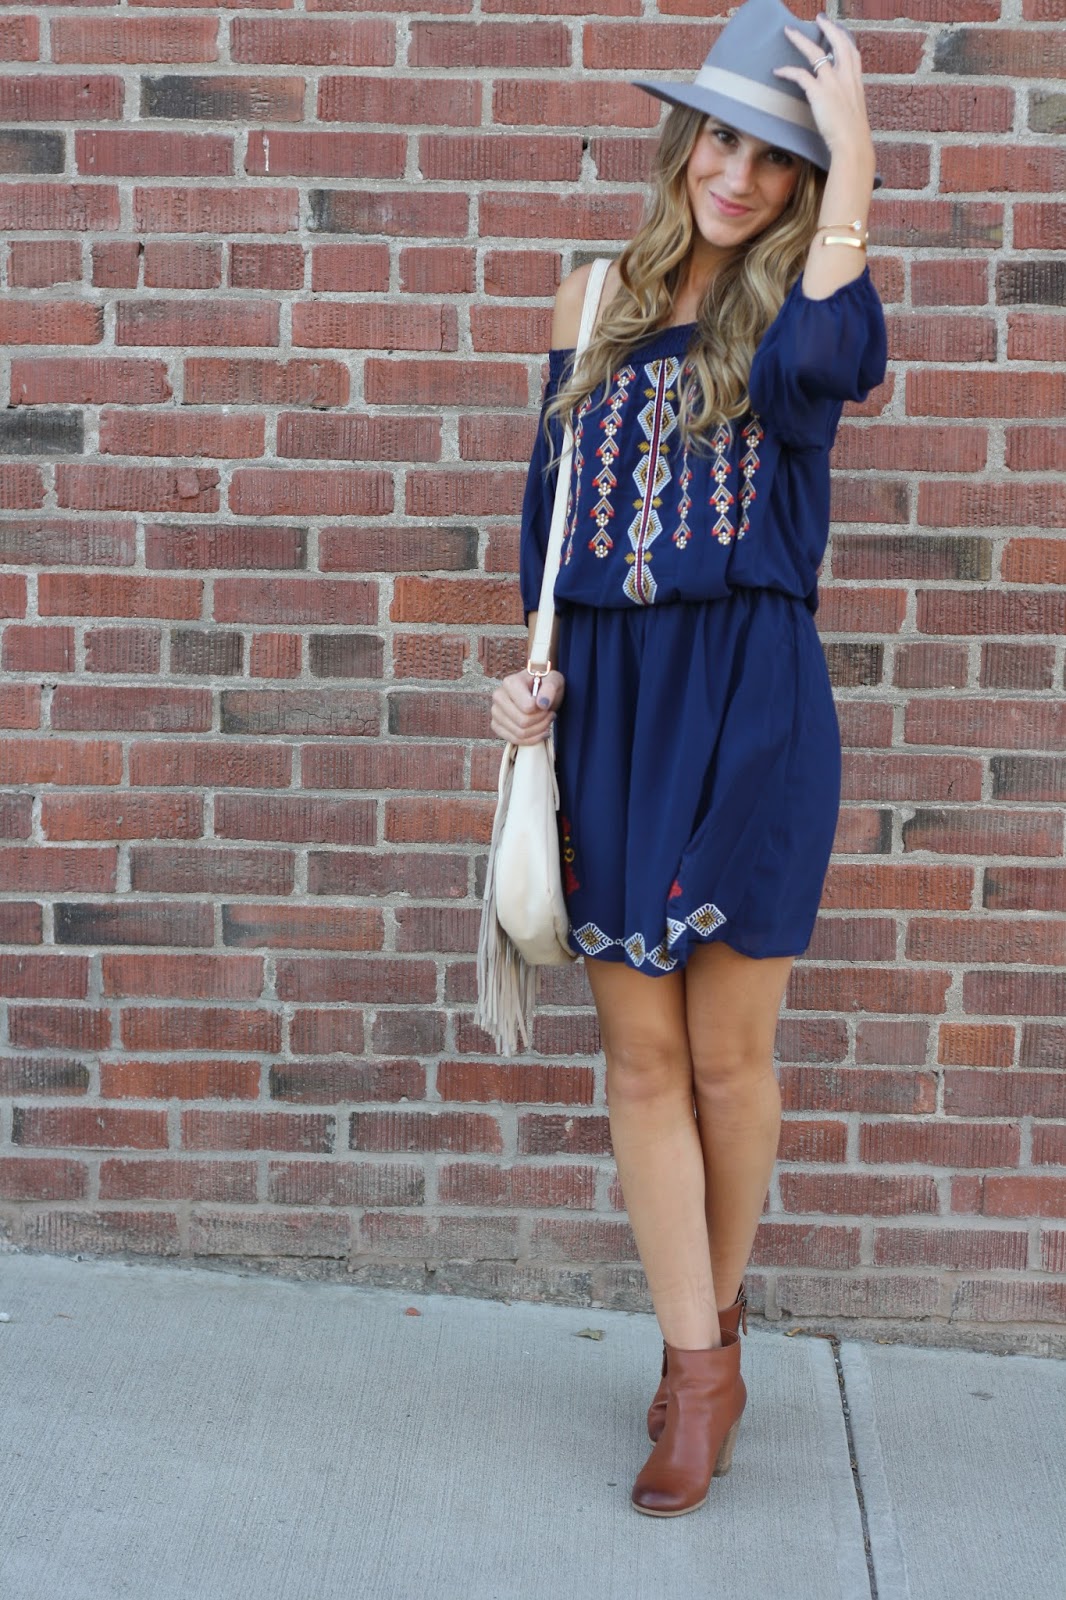 Little Blue Dress + Dealing with Grief - Twenties Girl Style